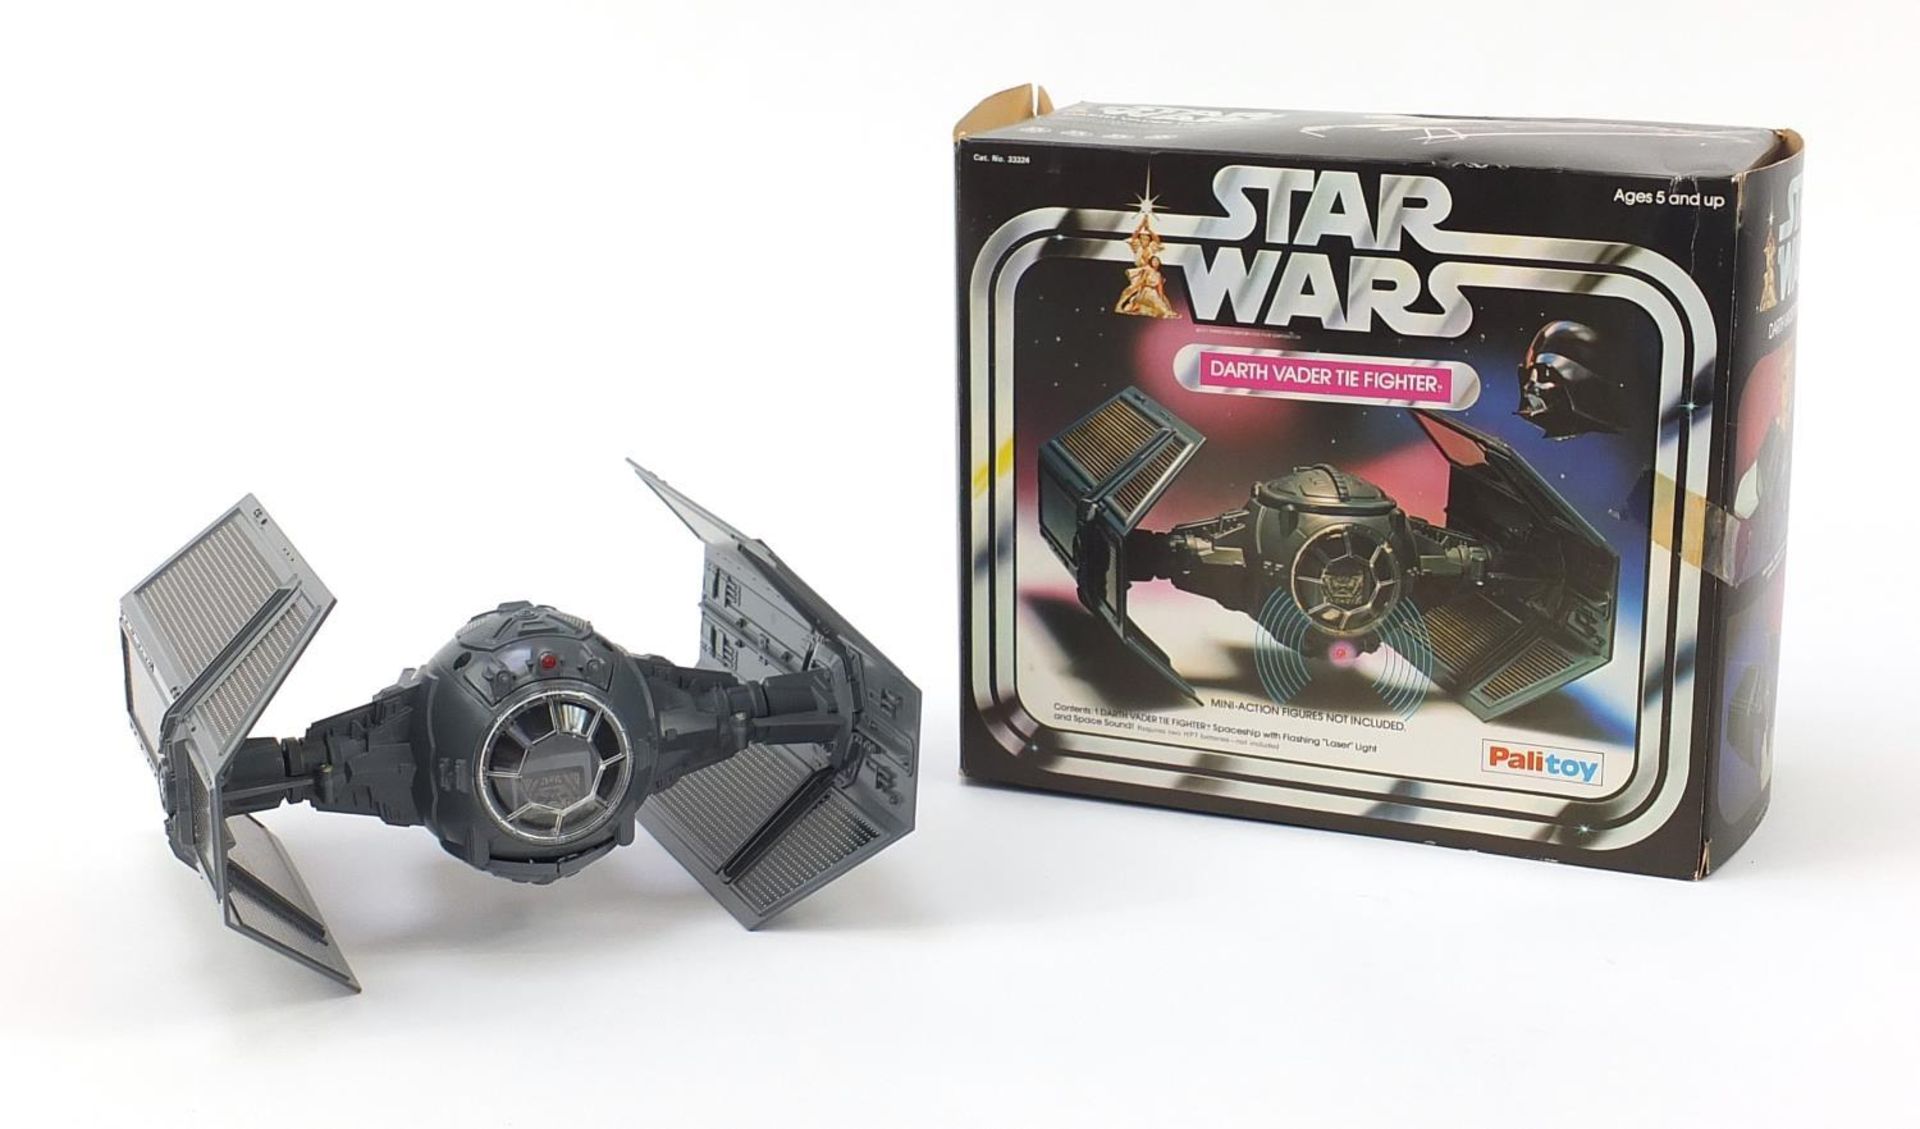 Vintage Star wars Darth Vader Tie Fighter with box by Palitoy :